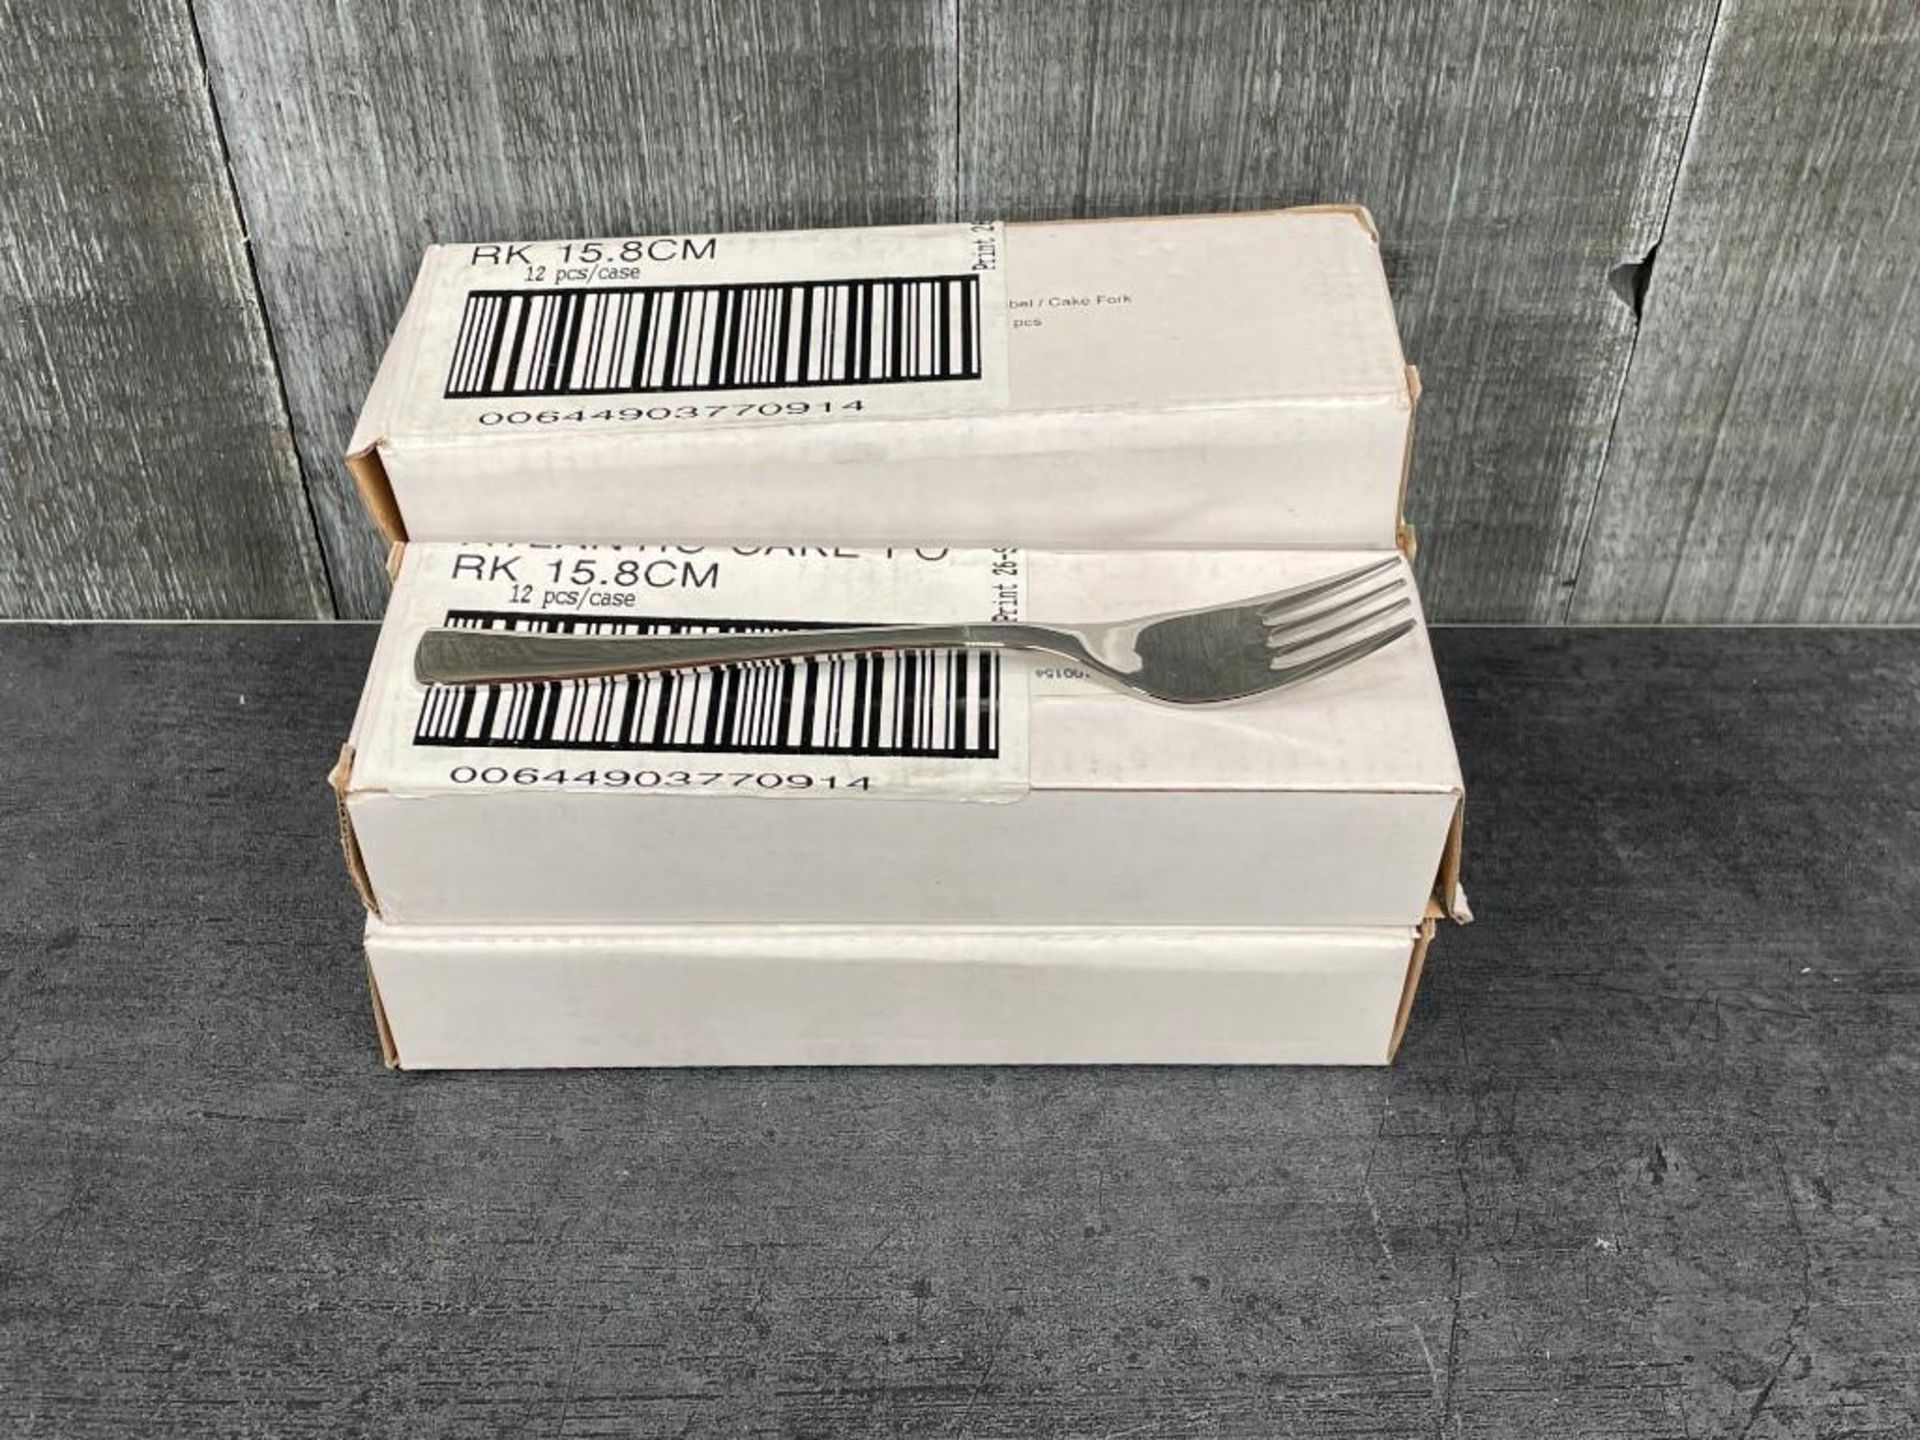 ATLANTIC HEAVY WEIGHT CAKE FORKS, SOLA MB223 - LOT OF 60 (5 BOXES) - Image 3 of 4